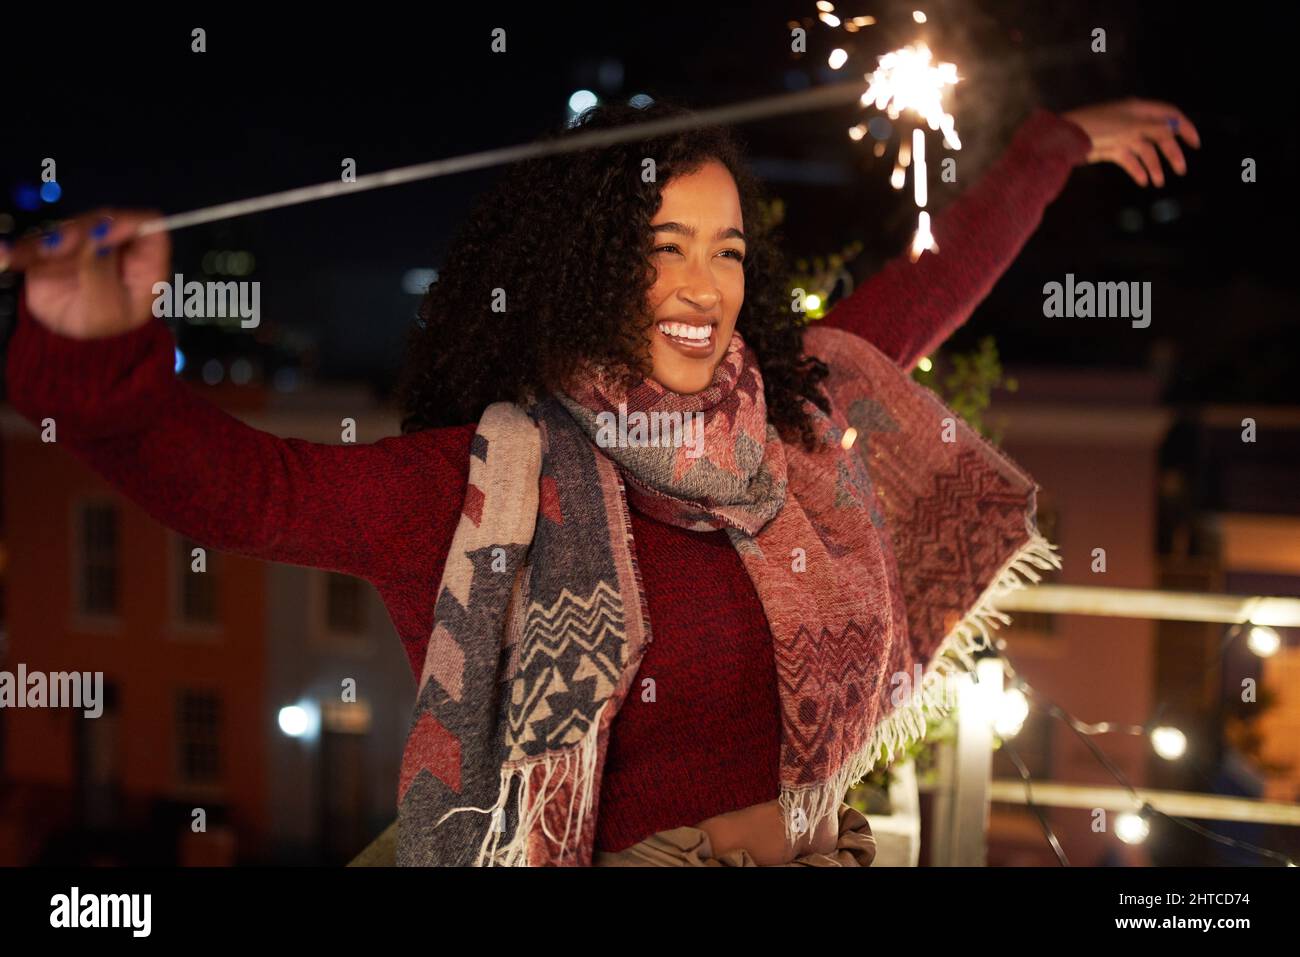 Confident multi-racial young adult female dancing while holding a sparkler on rooftop terrace. Good times, night life in the city. Stock Photo